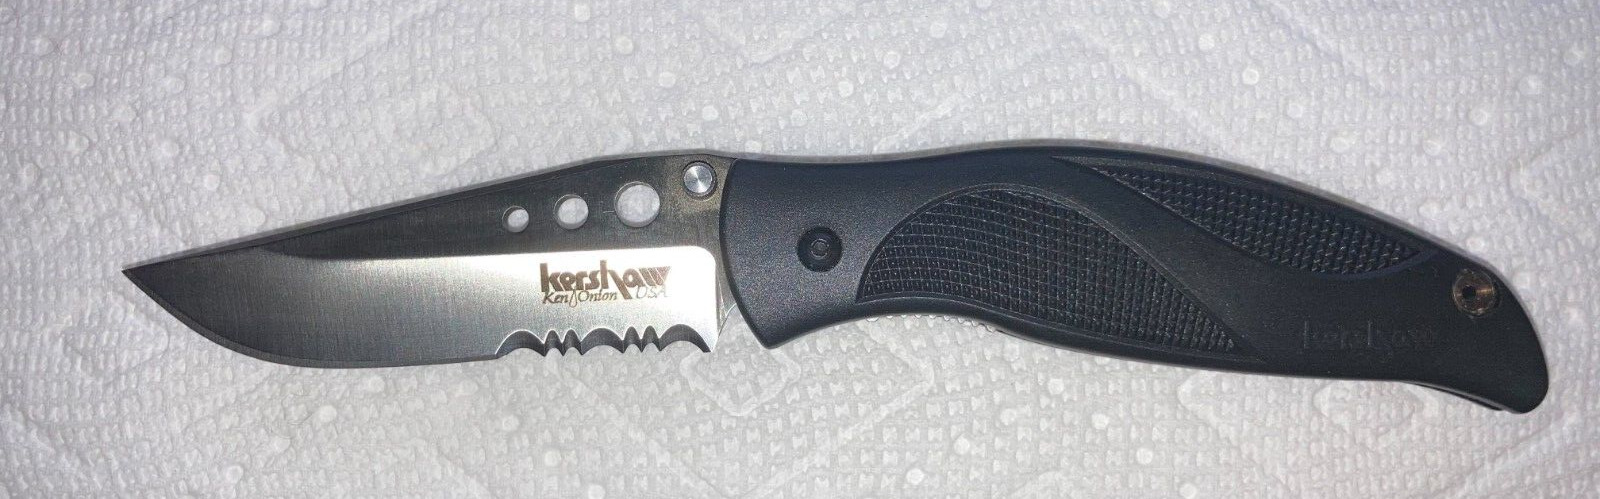 Kershaw Ken Onion Whirlwind 1560ST Discontinued Pocket Knife - \